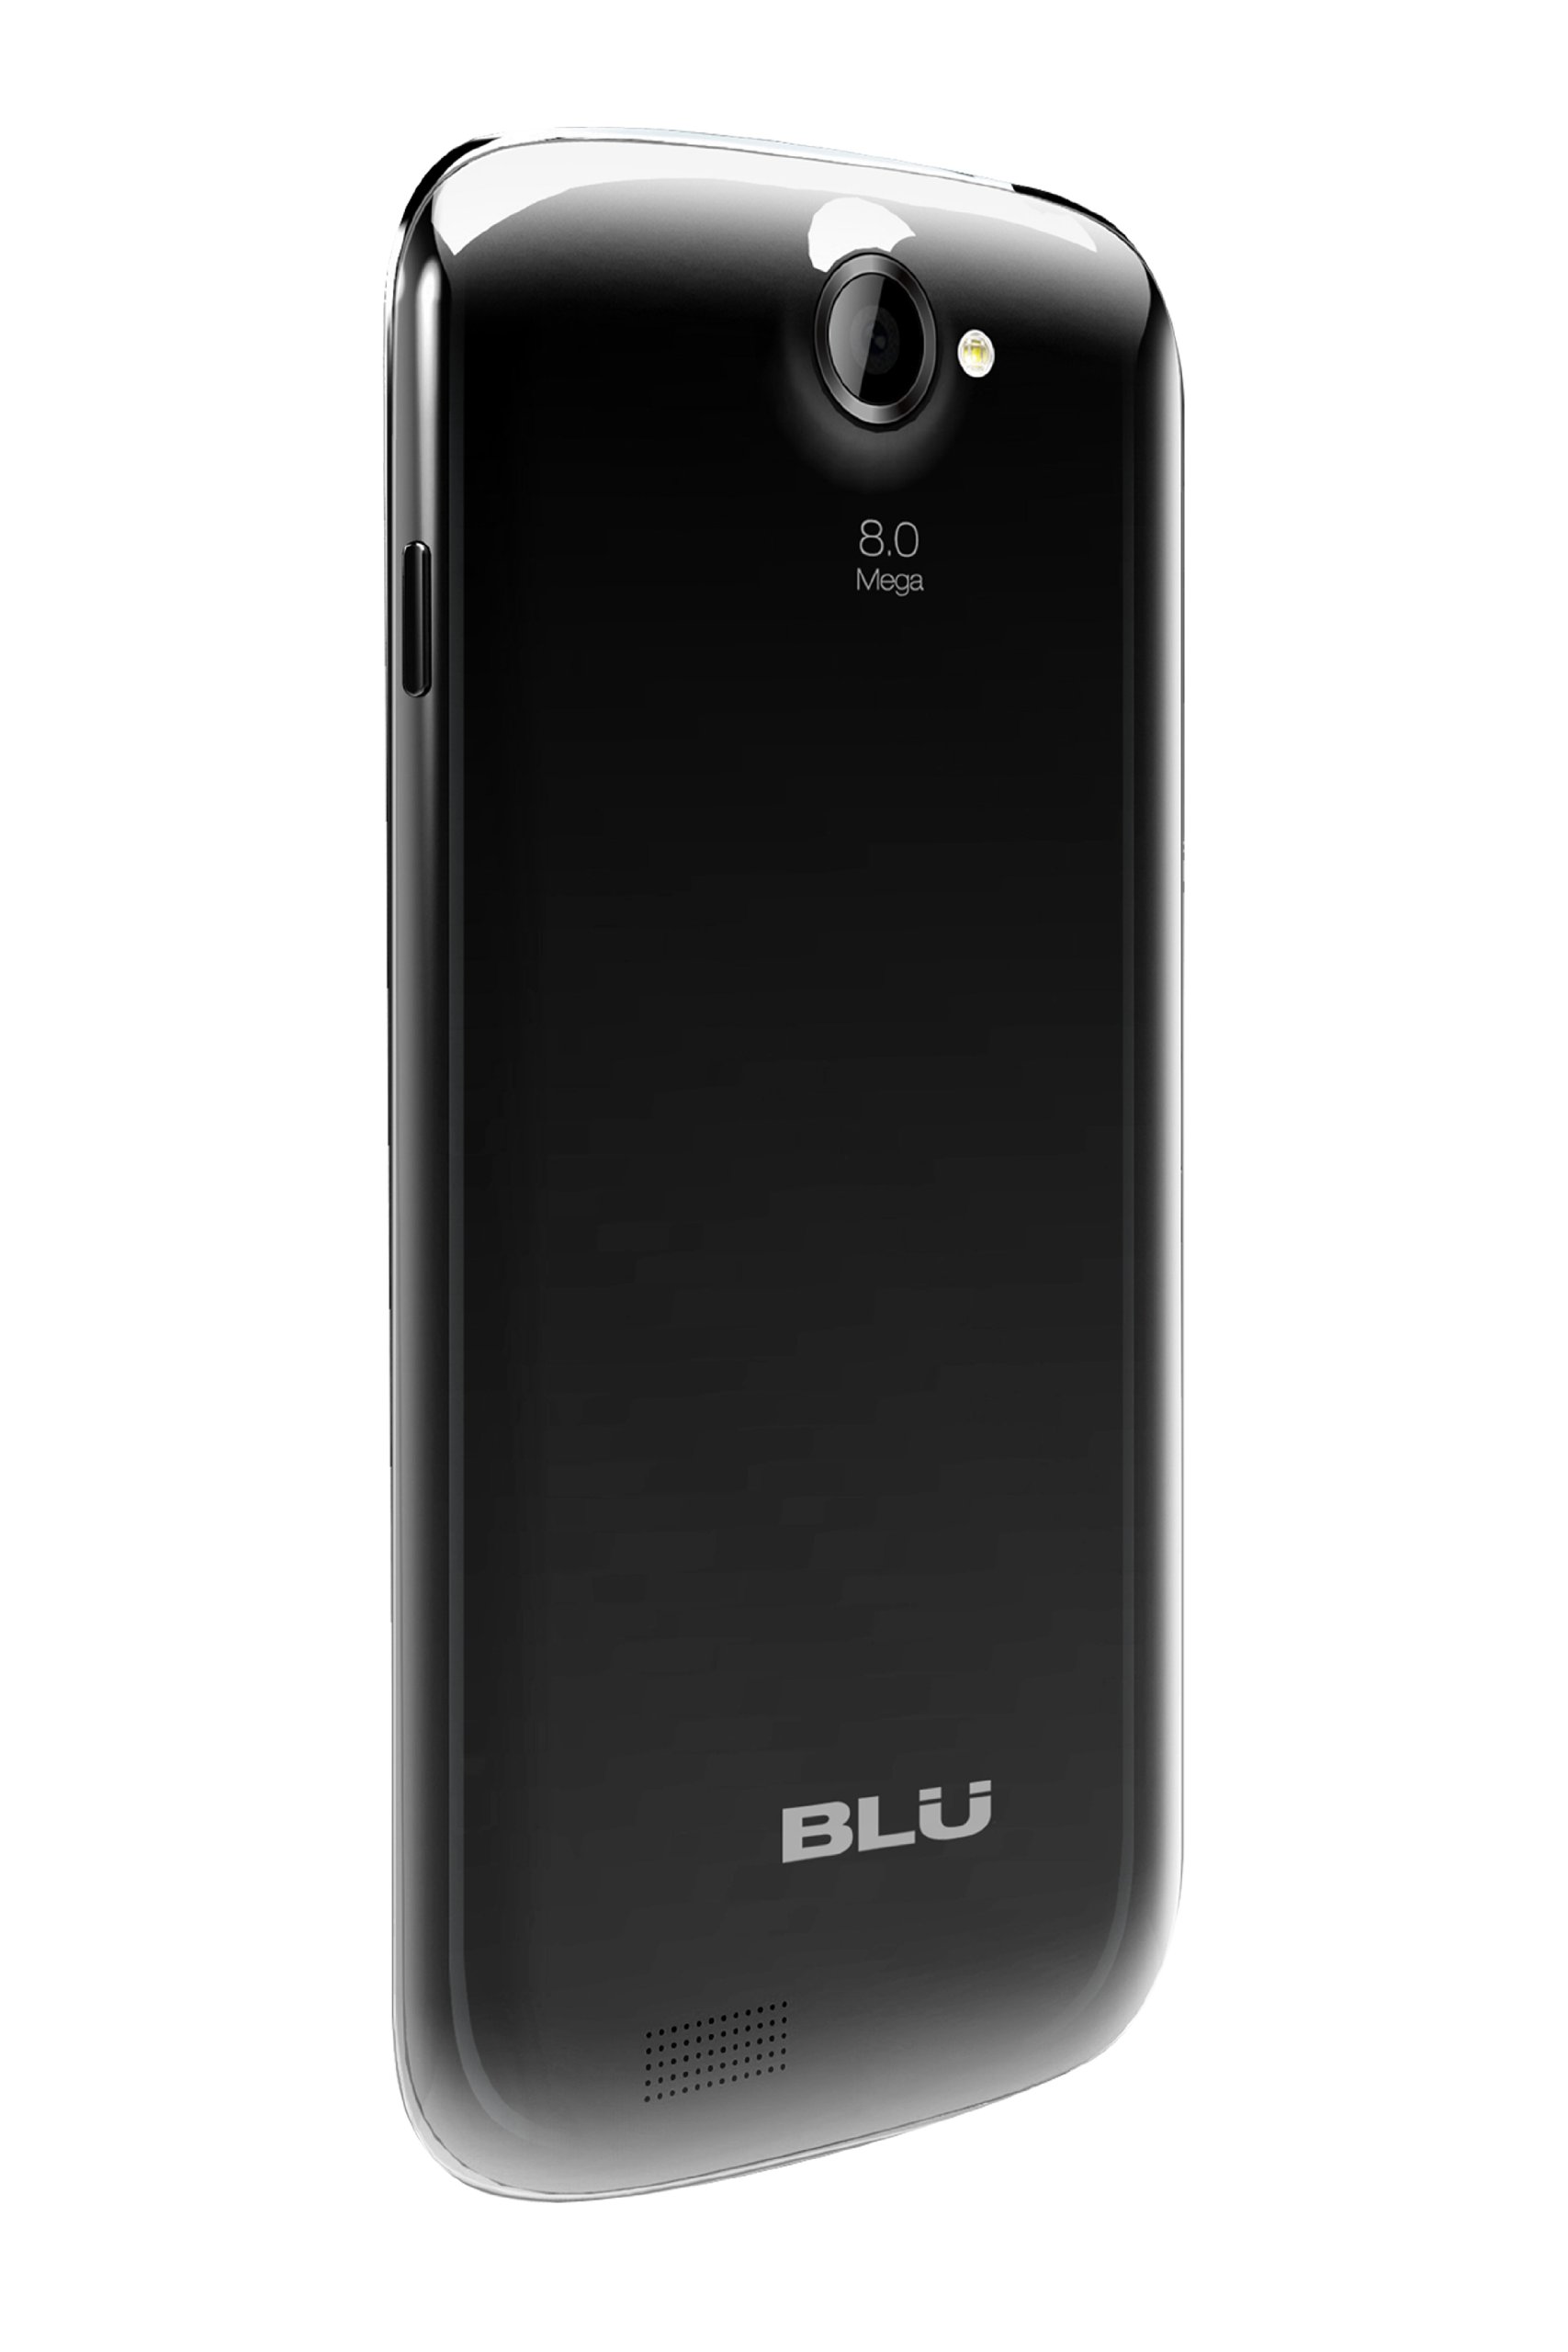 BLU Studio 5.3 S Unlocked Dual Sim Phone with Quad-Core 1.2GHz Processor, Android 4.1 JB, 5.3-inch IPS High Resolution Display, and 8MP Camera (Black)